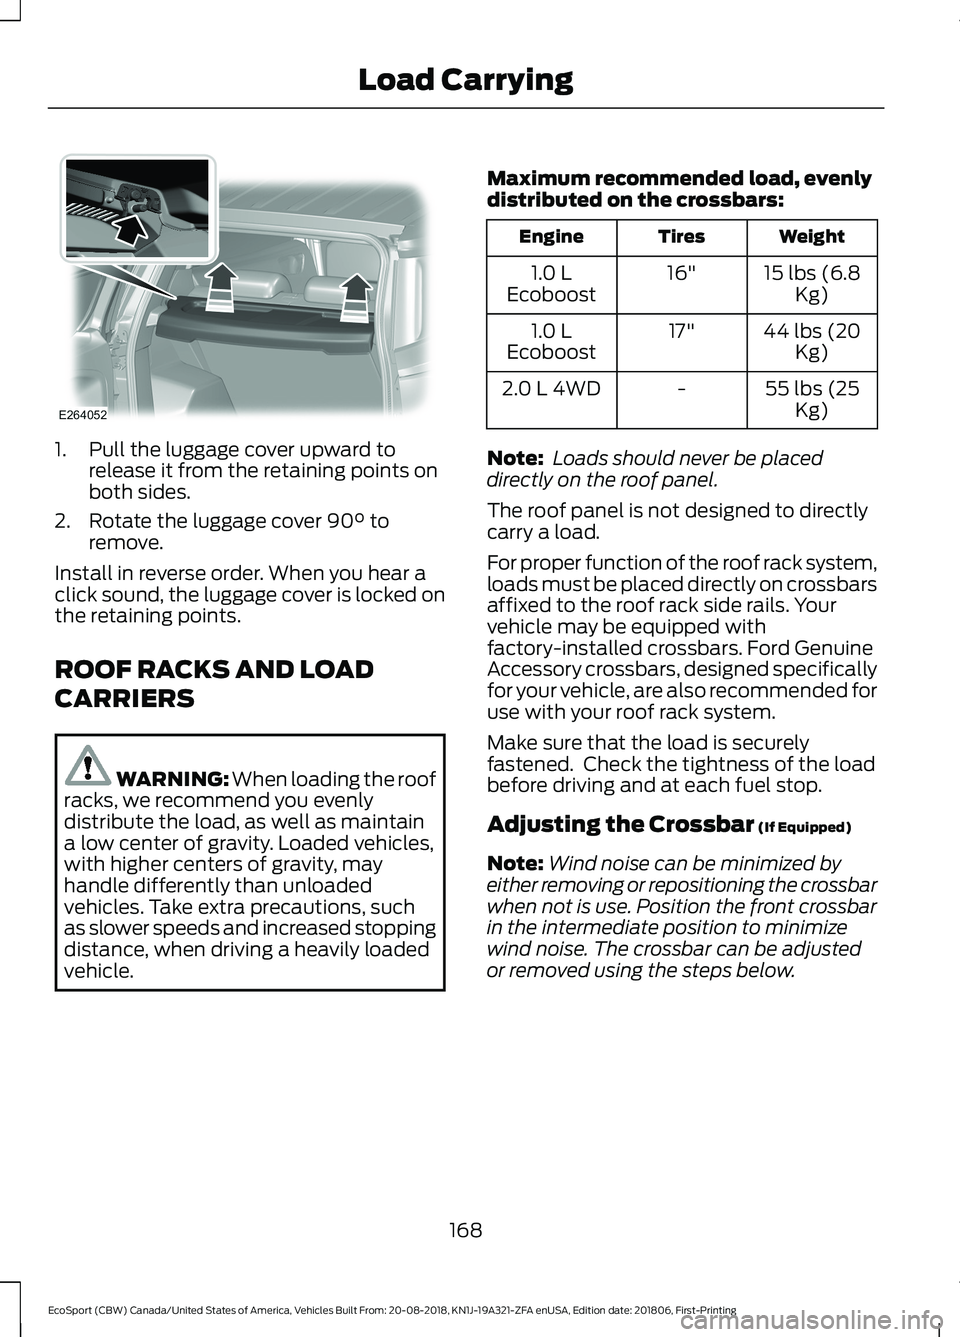 FORD ECOSPORT 2019  Owners Manual 1.Pull the luggage cover upward torelease it from the retaining points onboth sides.
2.Rotate the luggage cover 90° toremove.
Install in reverse order. When you hear aclick sound, the luggage cover i